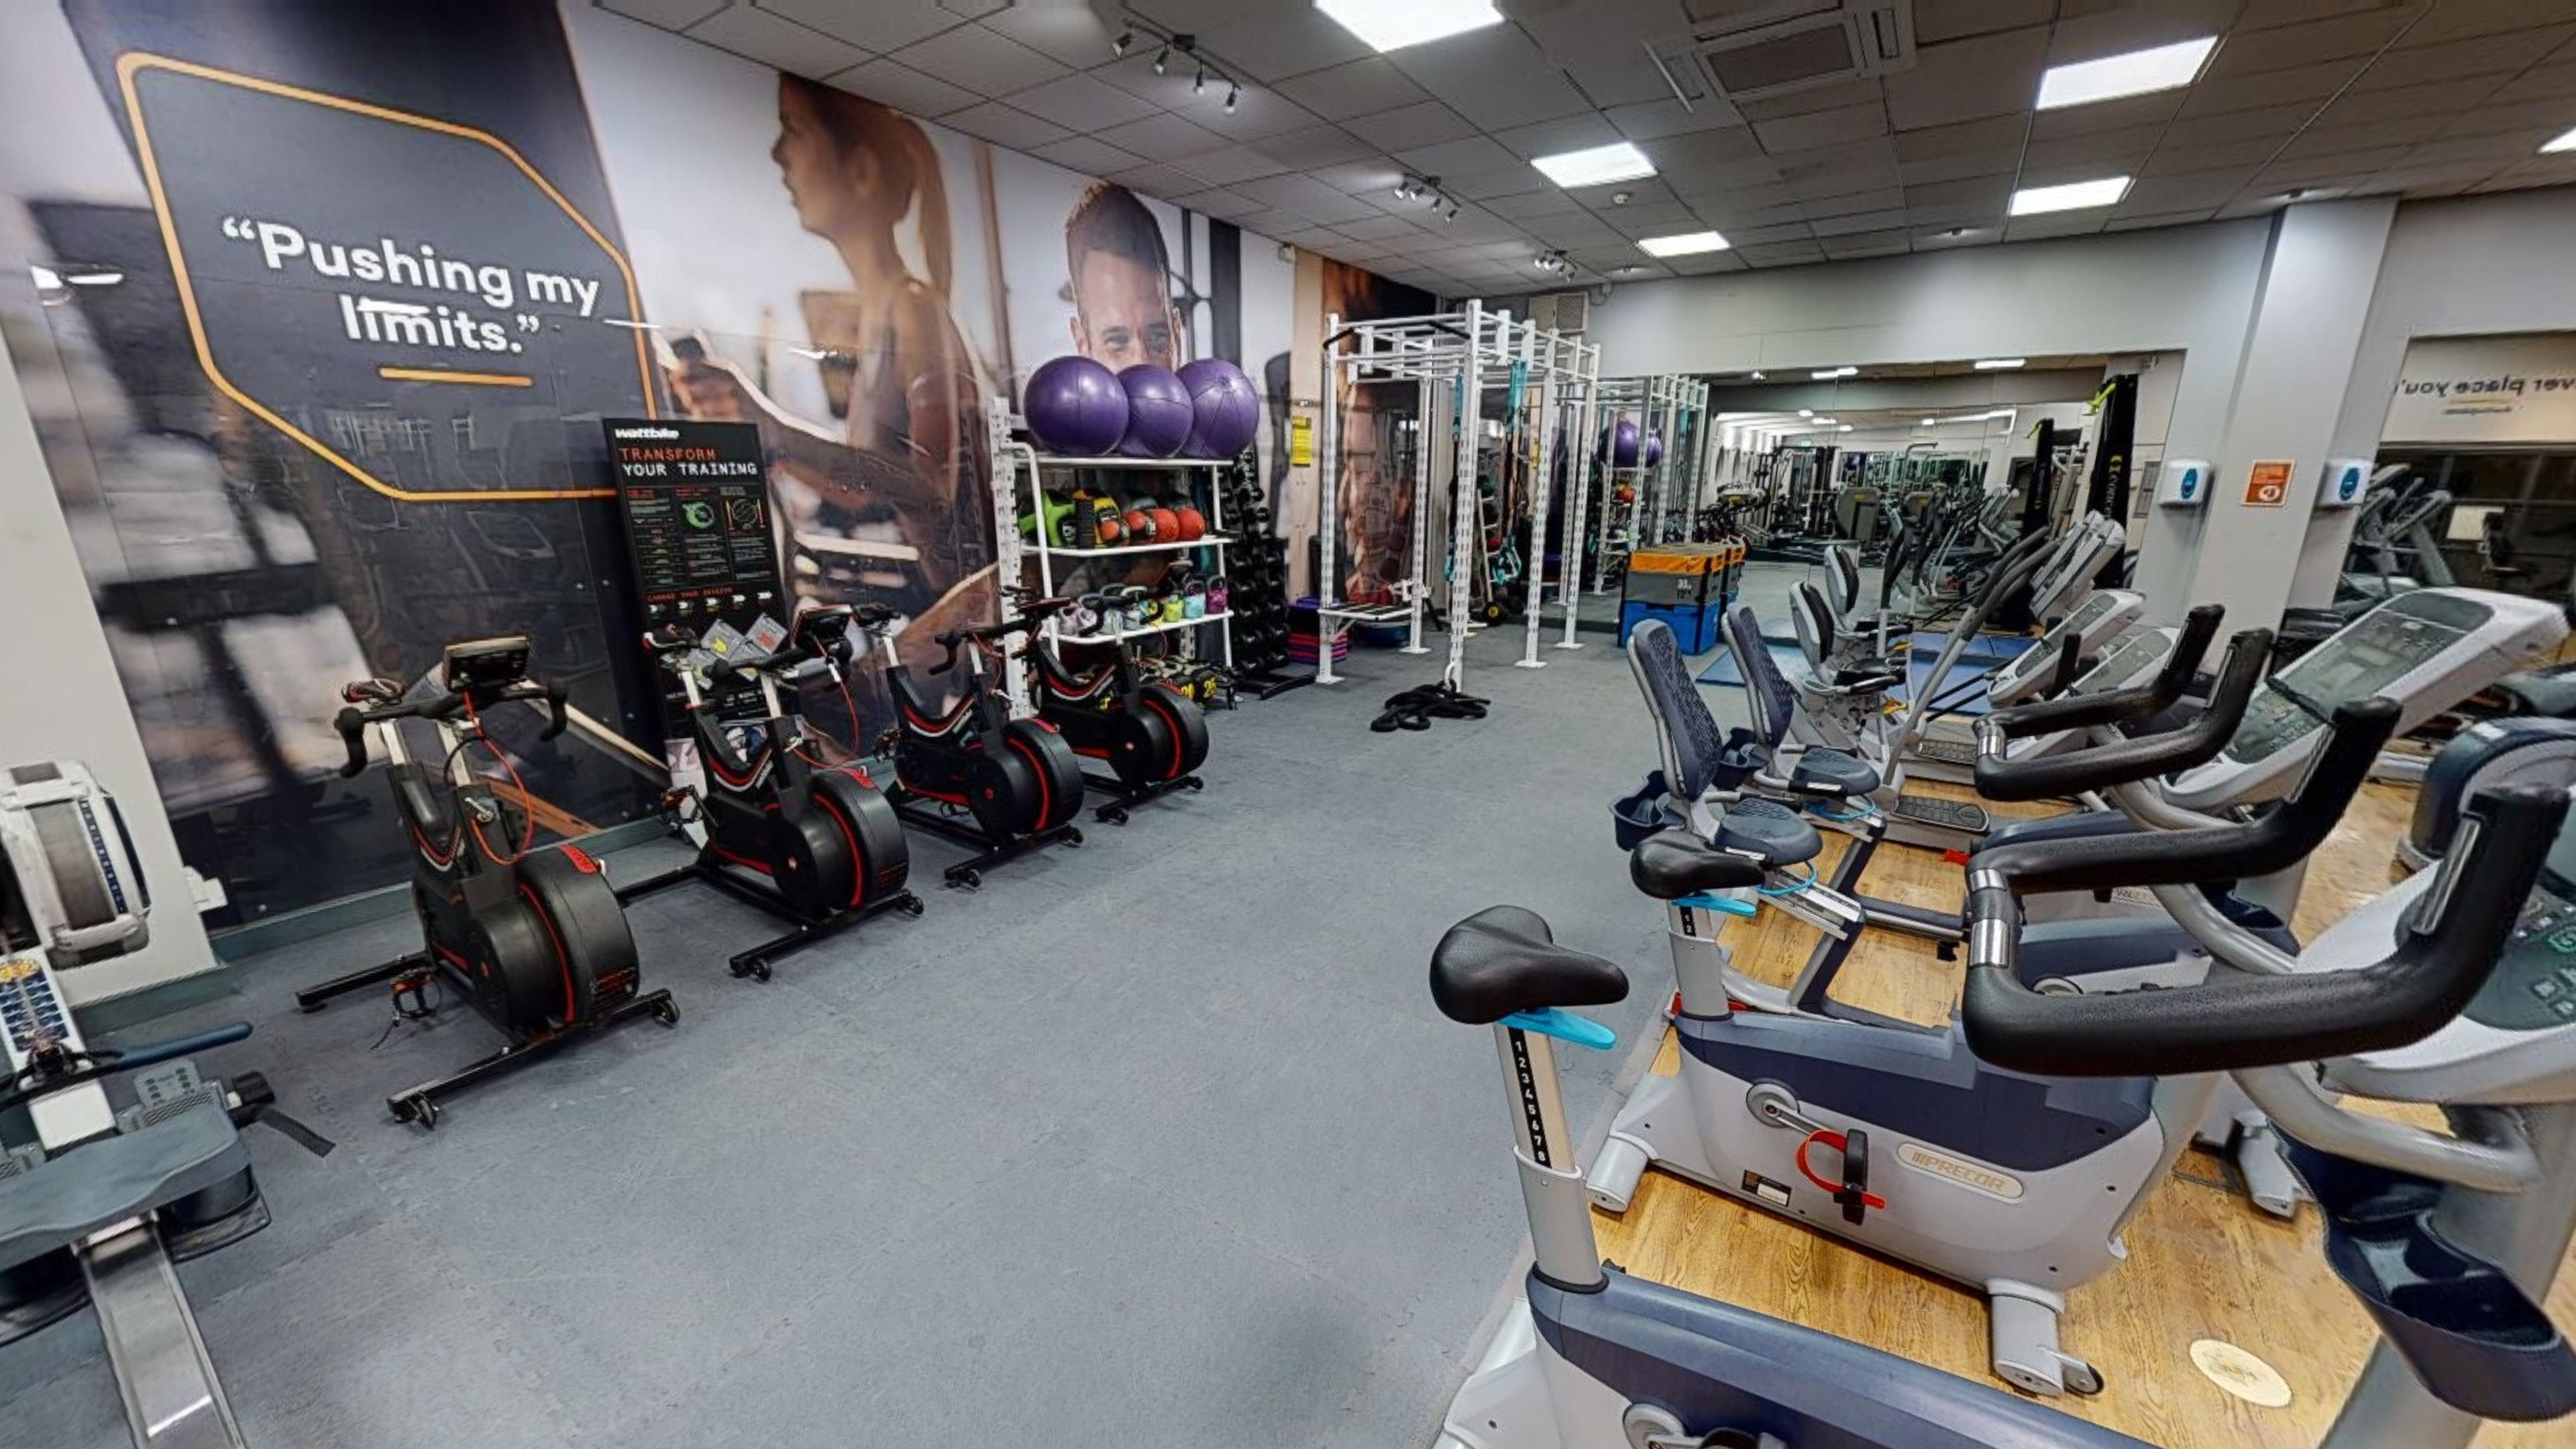 Gym at St Crispin's Leisure Centre St Crispin's Leisure Centre Wokingham 01189 791066